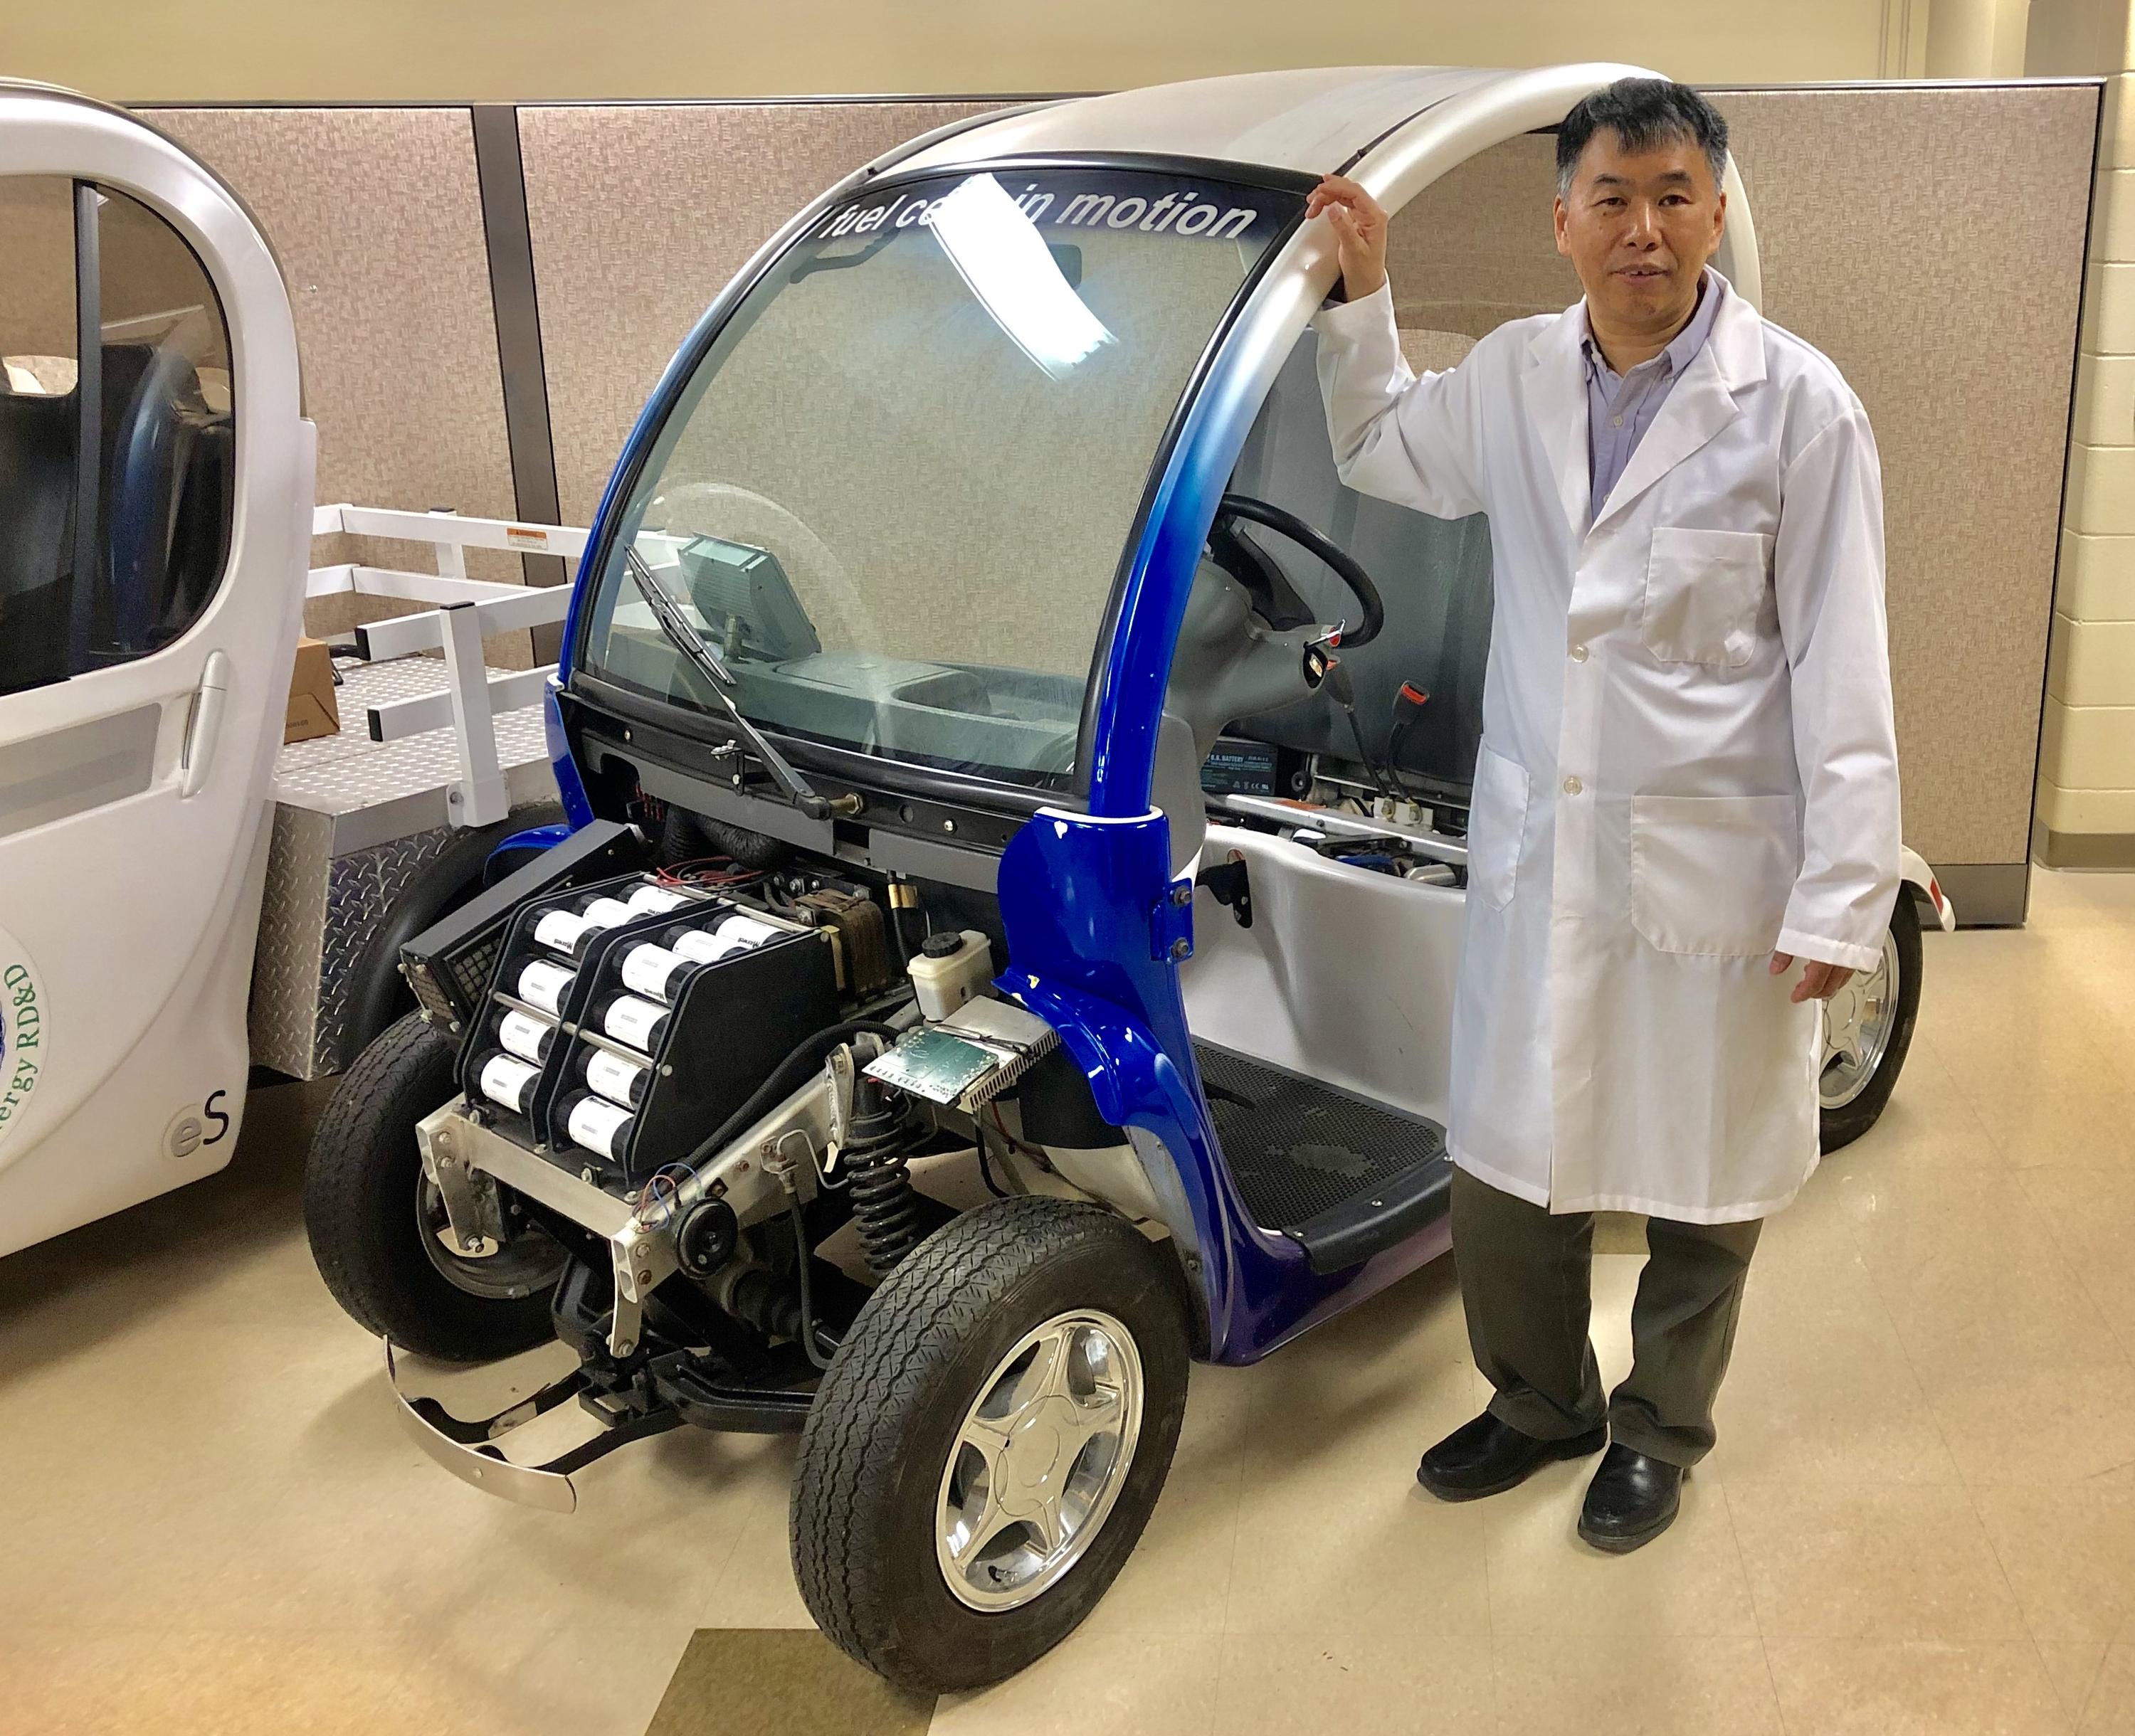 Li, a professor of mechanicaland mechatronics engineering, and director of the lab, pose with a fuel cell test vehicle.